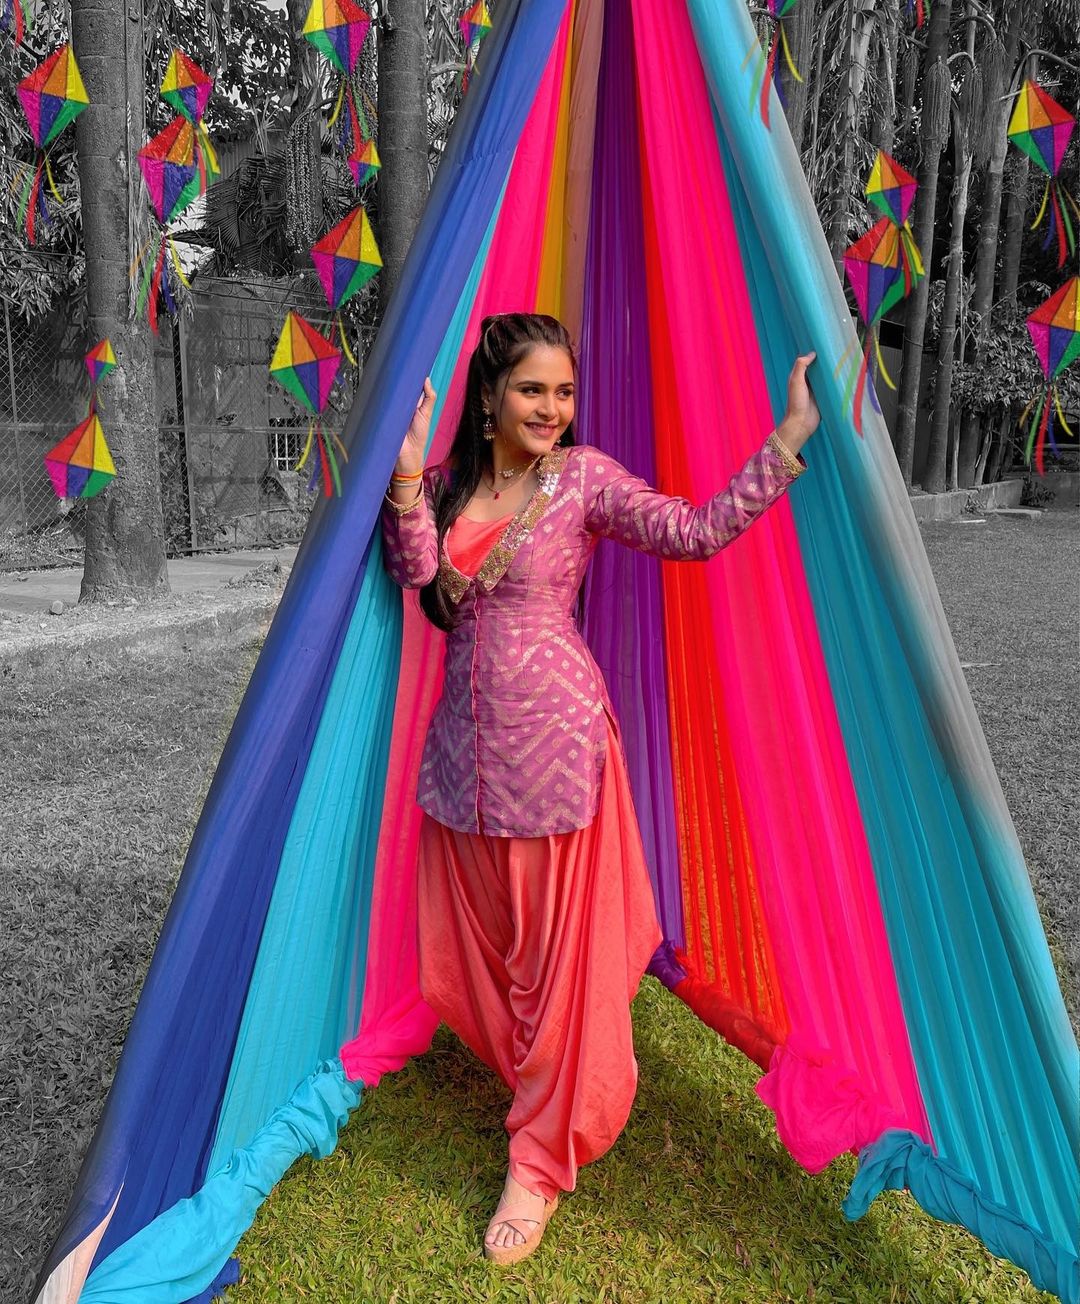 Muskan with colorful kites